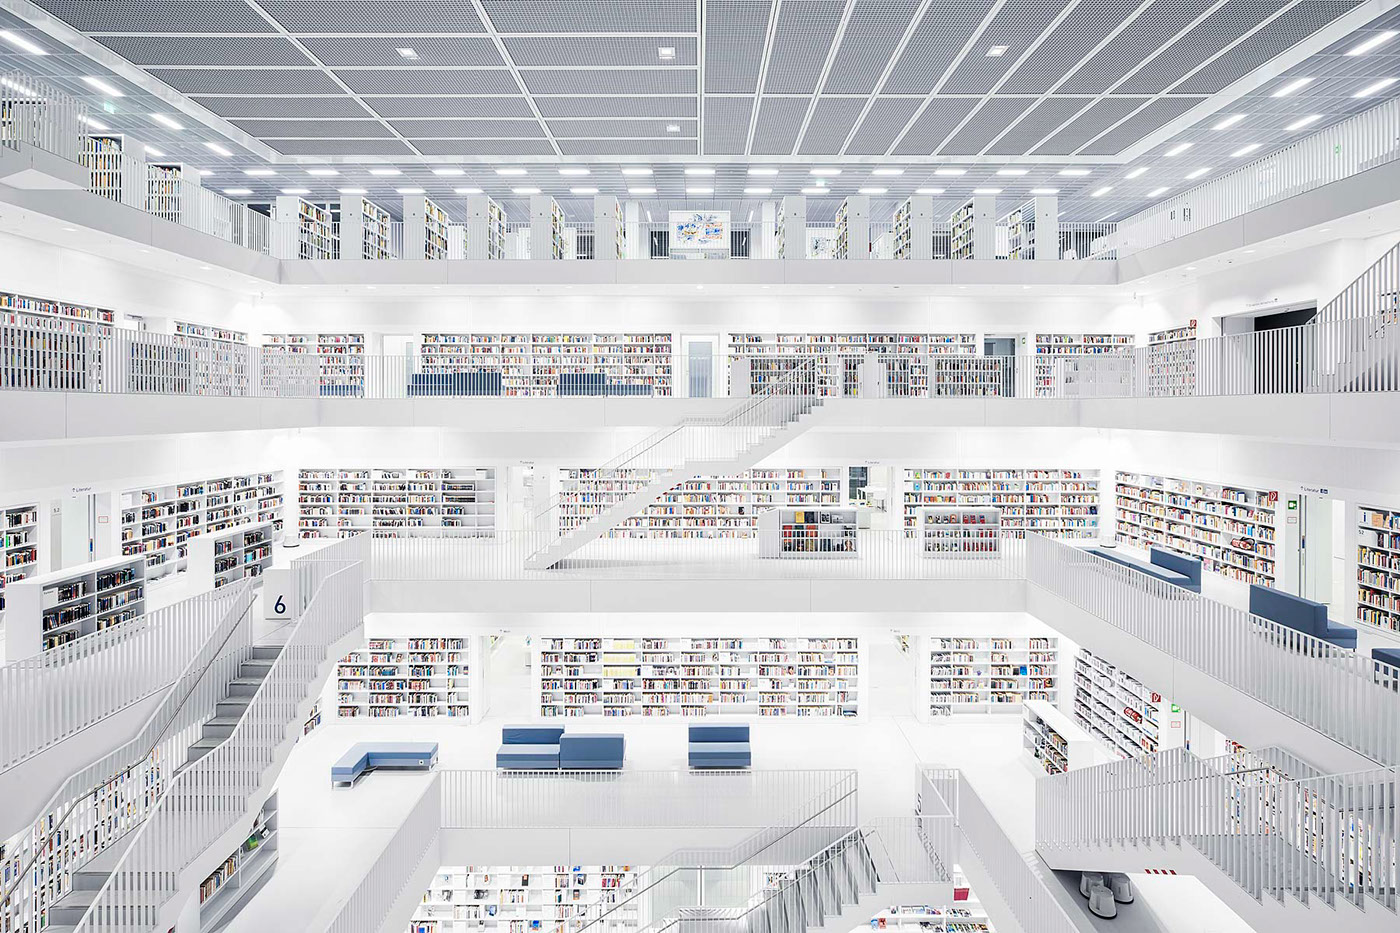 Gorgeous photos of libraries by Thibaud Poirier